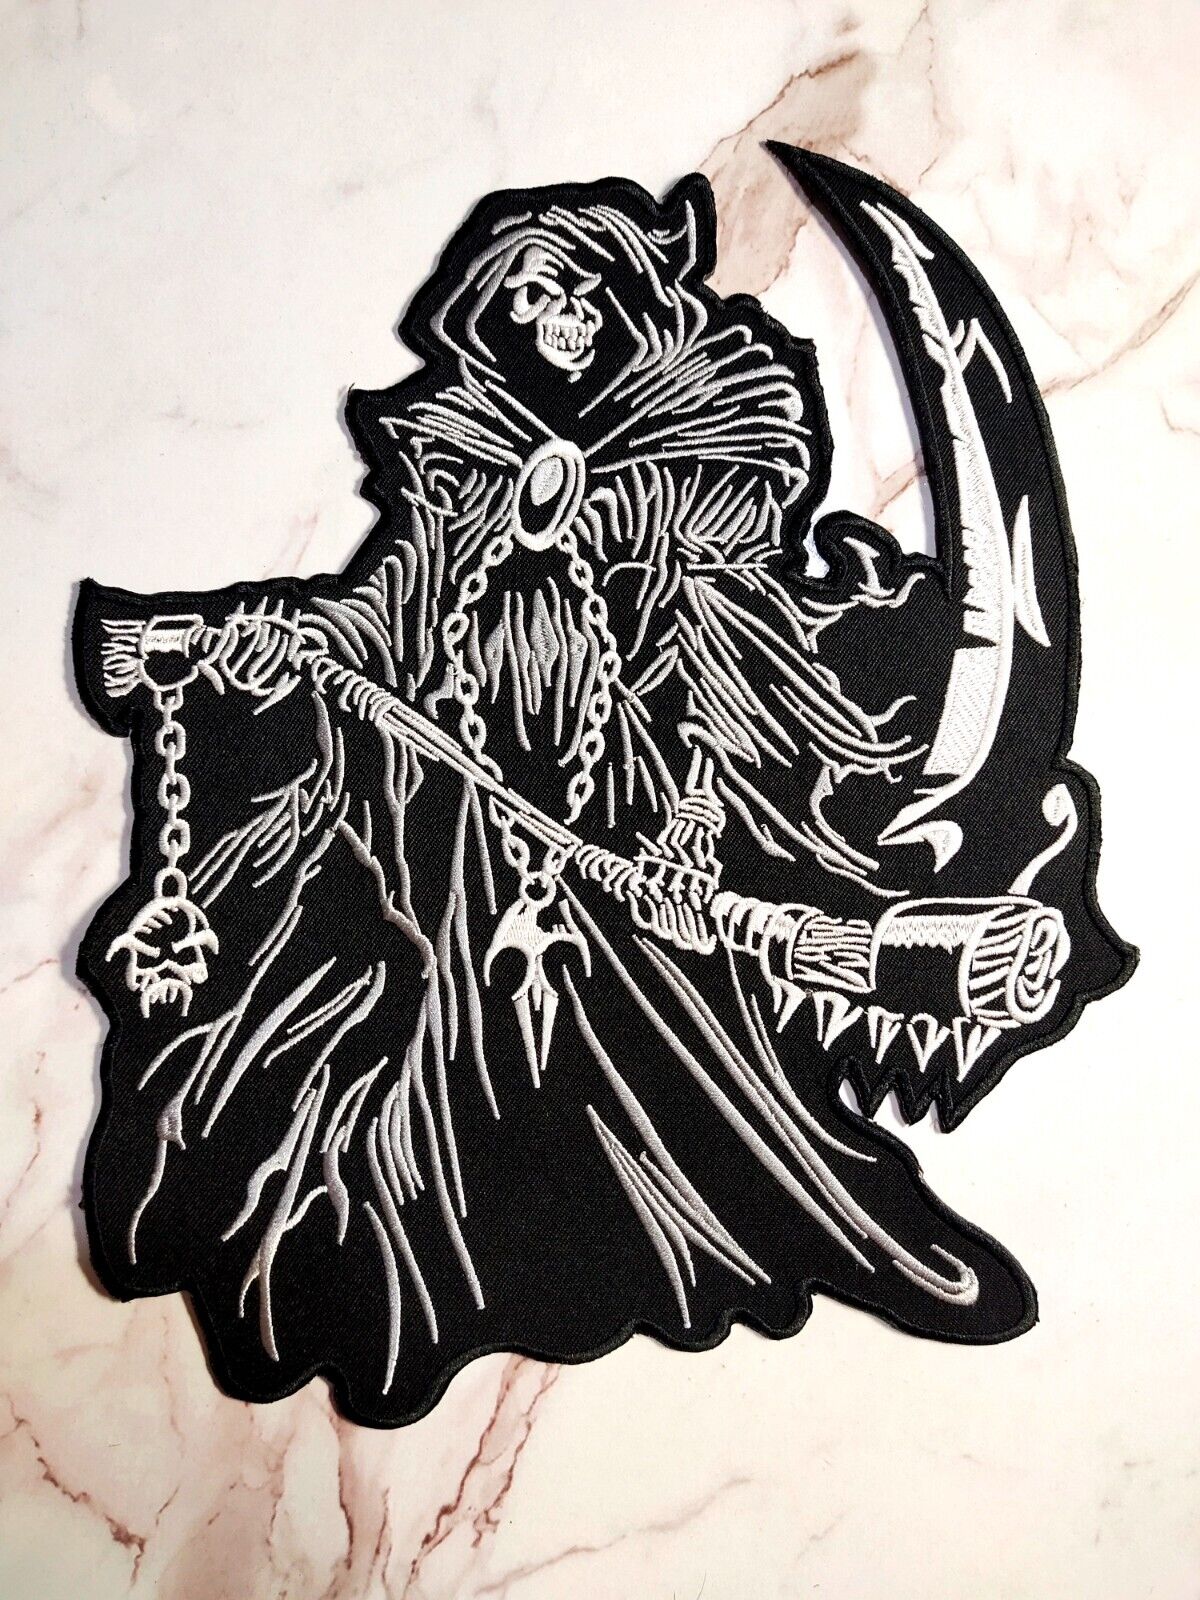 Grim Reaper Biker Skeleton Skull Motorcycle Embroidered Iron On Sew Patch Large